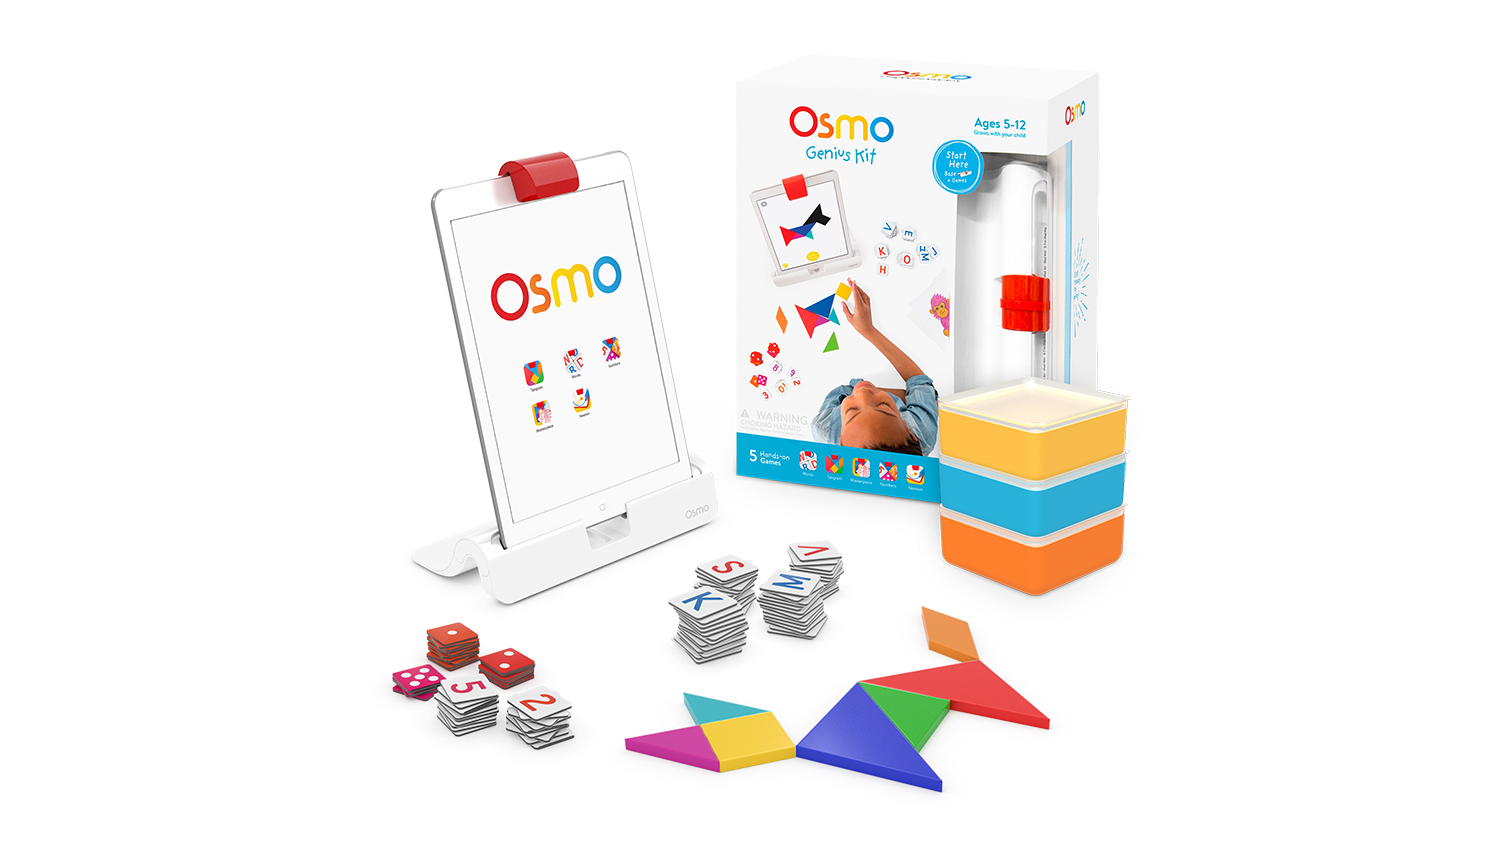 Made for iPad Ages 5-12 Years  New Open Box some damage 2 box Osmo Genius Kit 